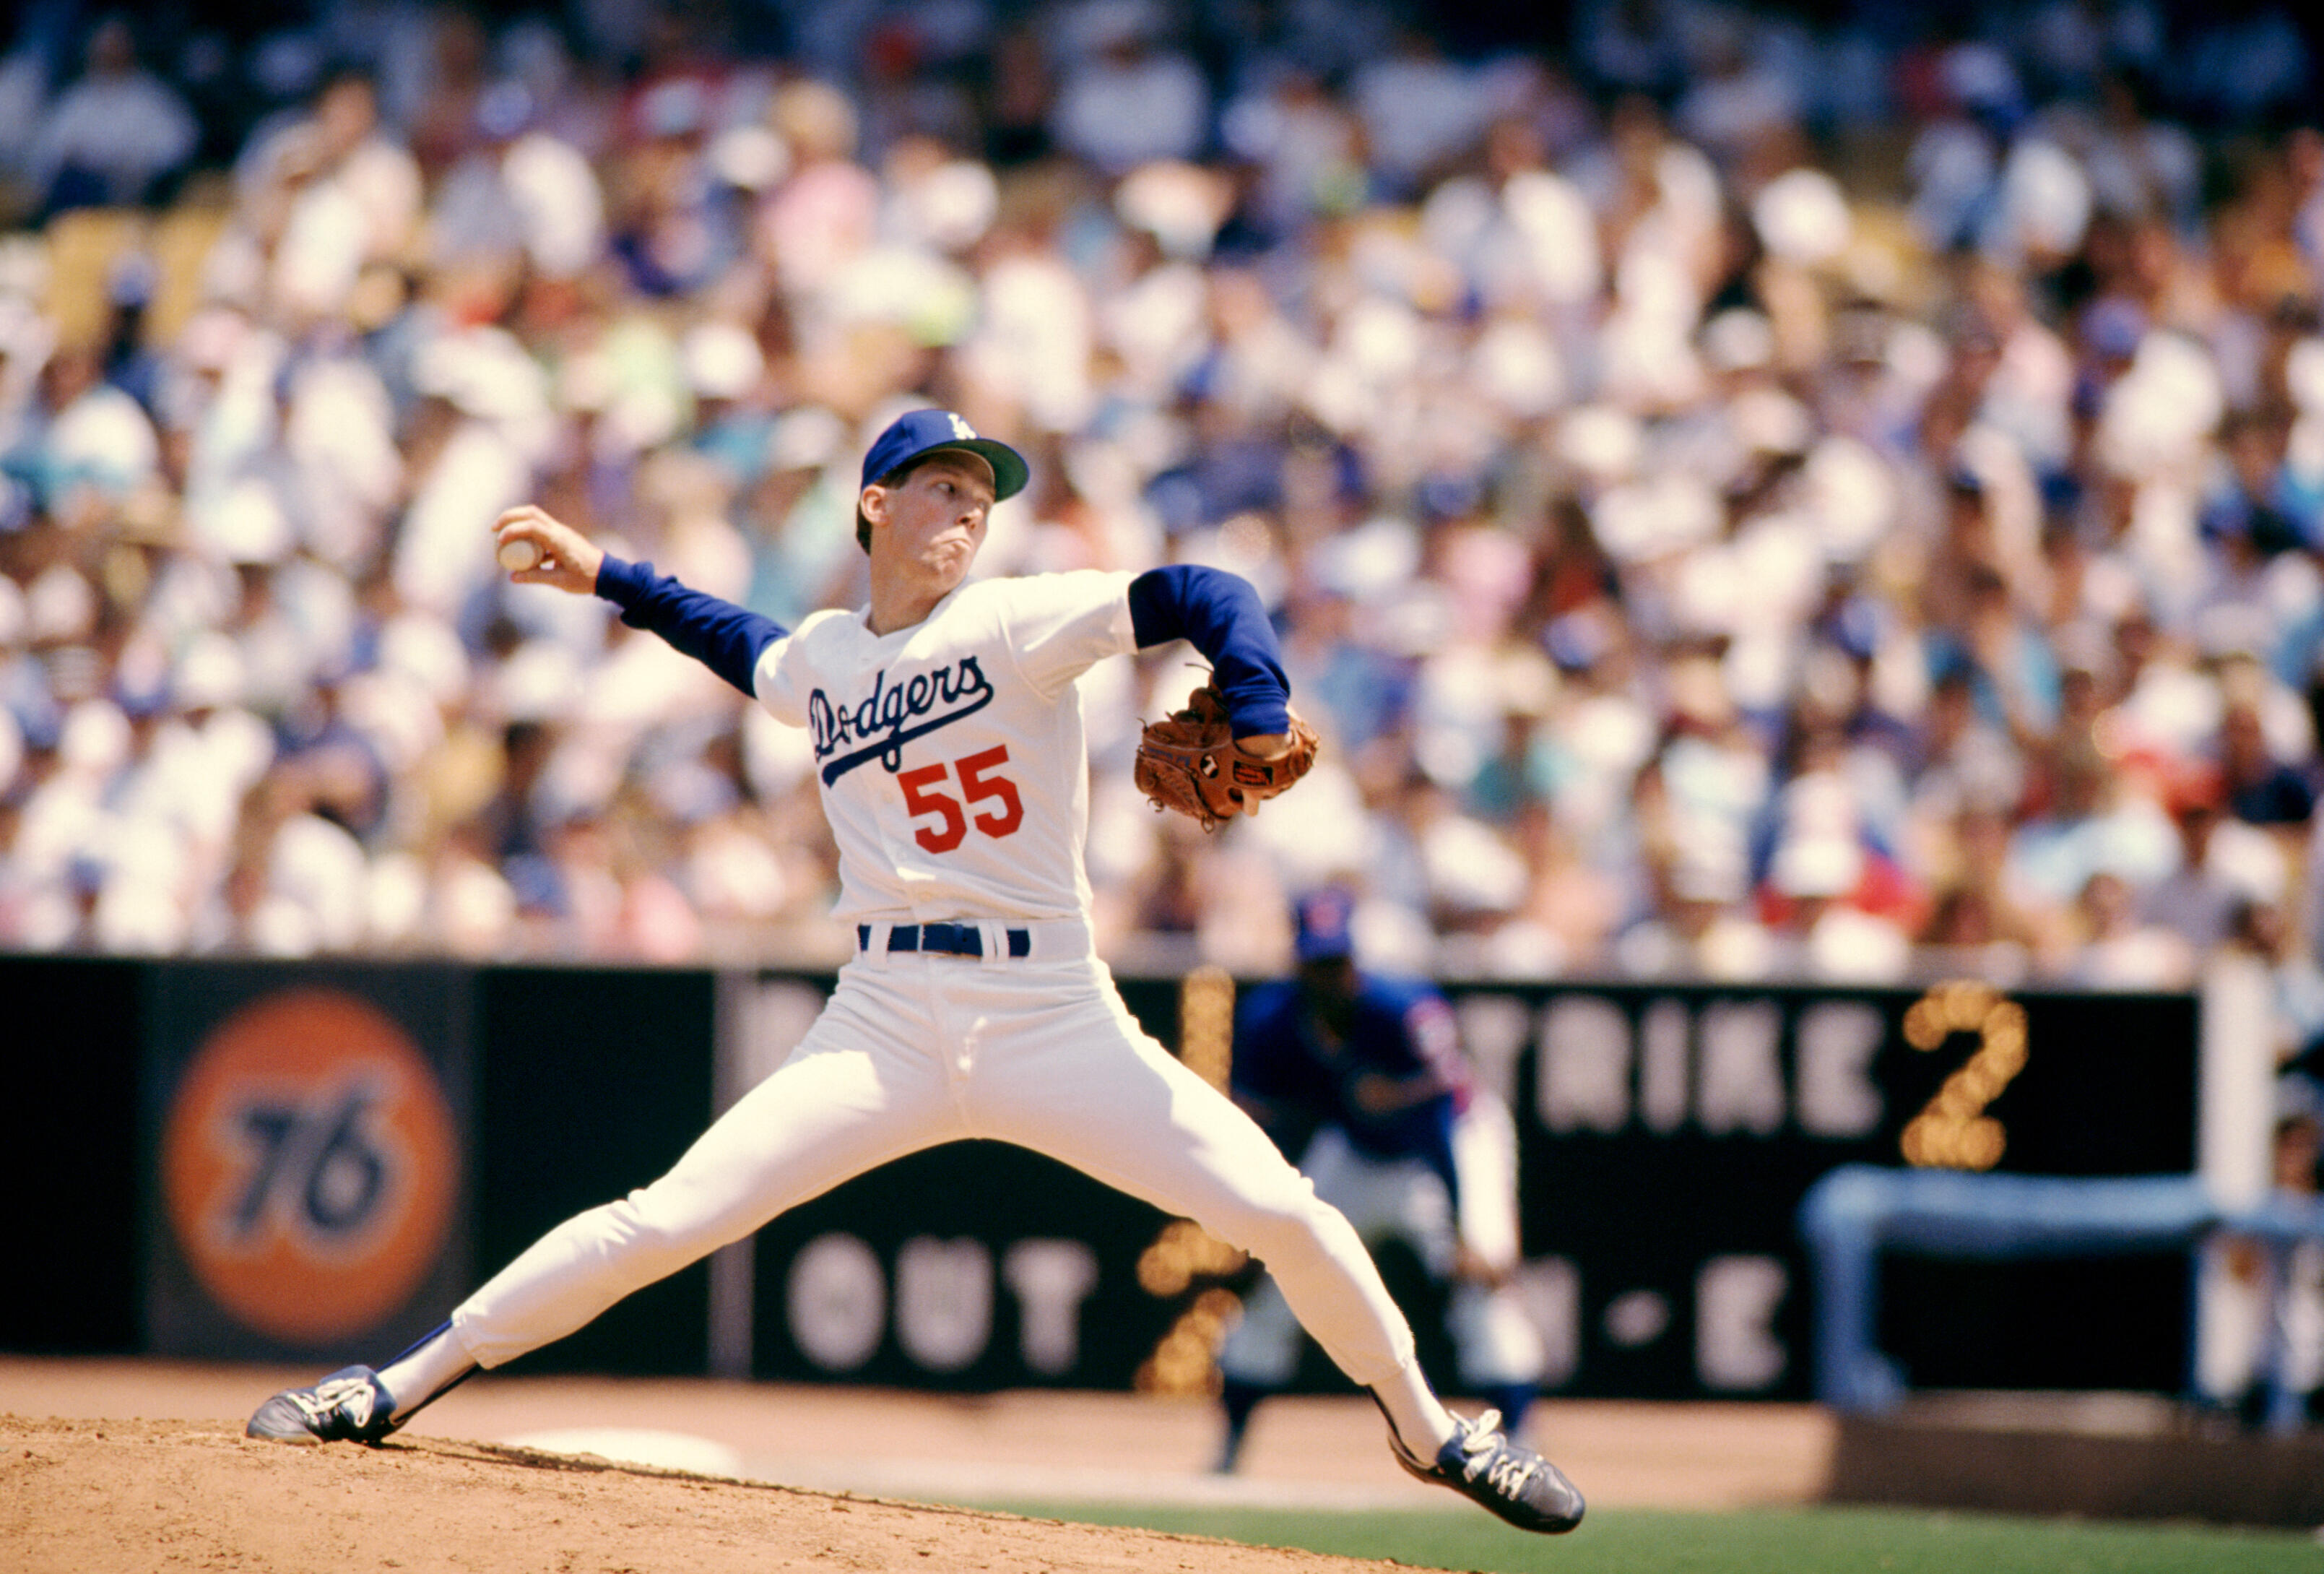 LOS ANGELES, CA - 1989:  Pitcher Orel Hersheiser #55 of the Los Angeles Dodgers throws during an MLB game against the New York Mets circa 1989 at Dodger Stadium in Los Angeles, California.  (Photo by Mike Powell/Getty Images)